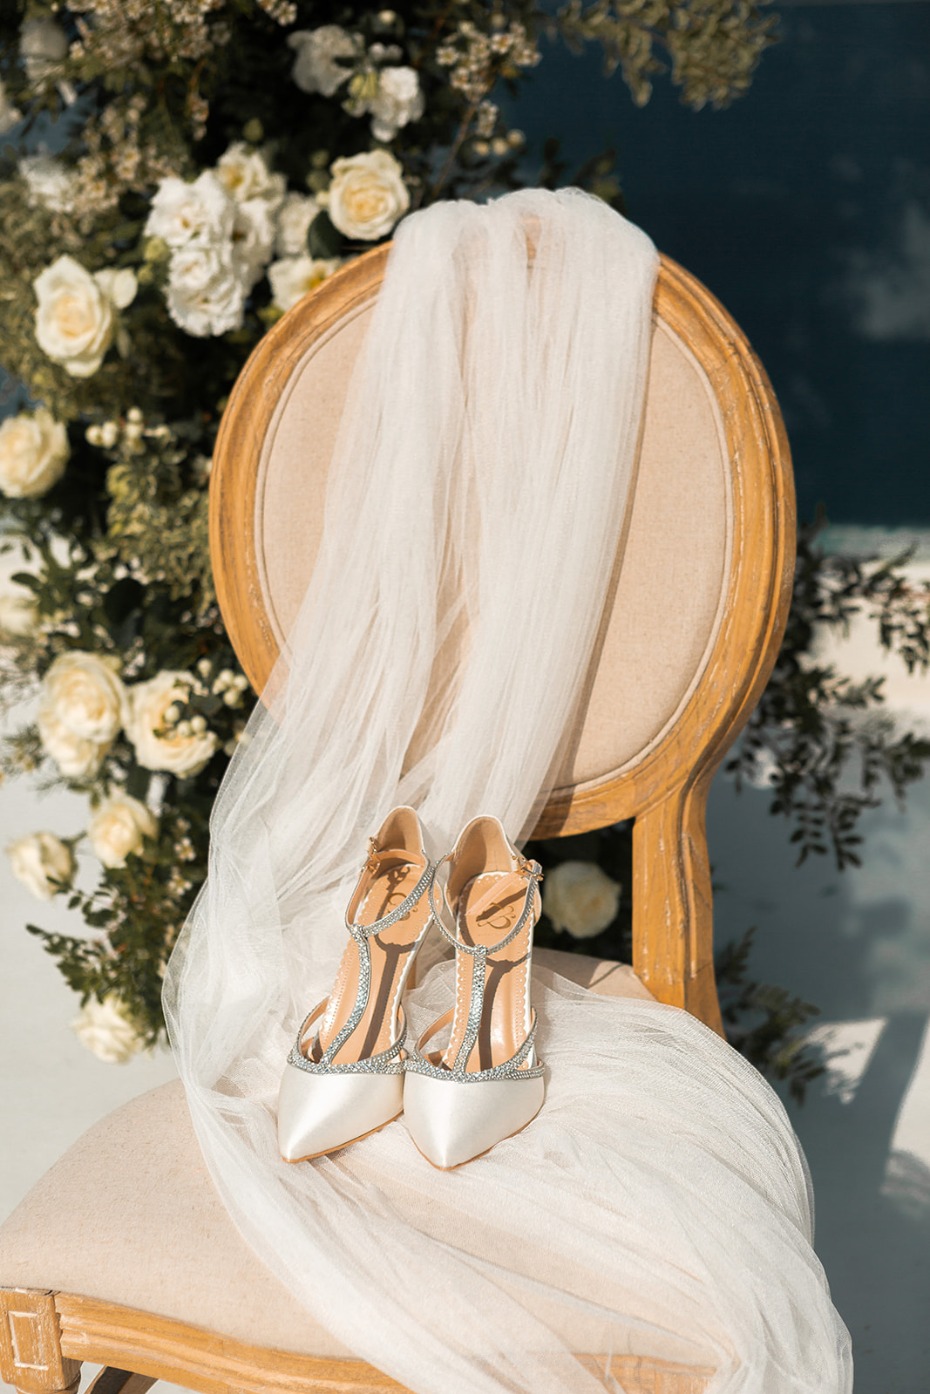 Meet the Luxury Planning Group Behind This Stunning Grecian Wedding Look